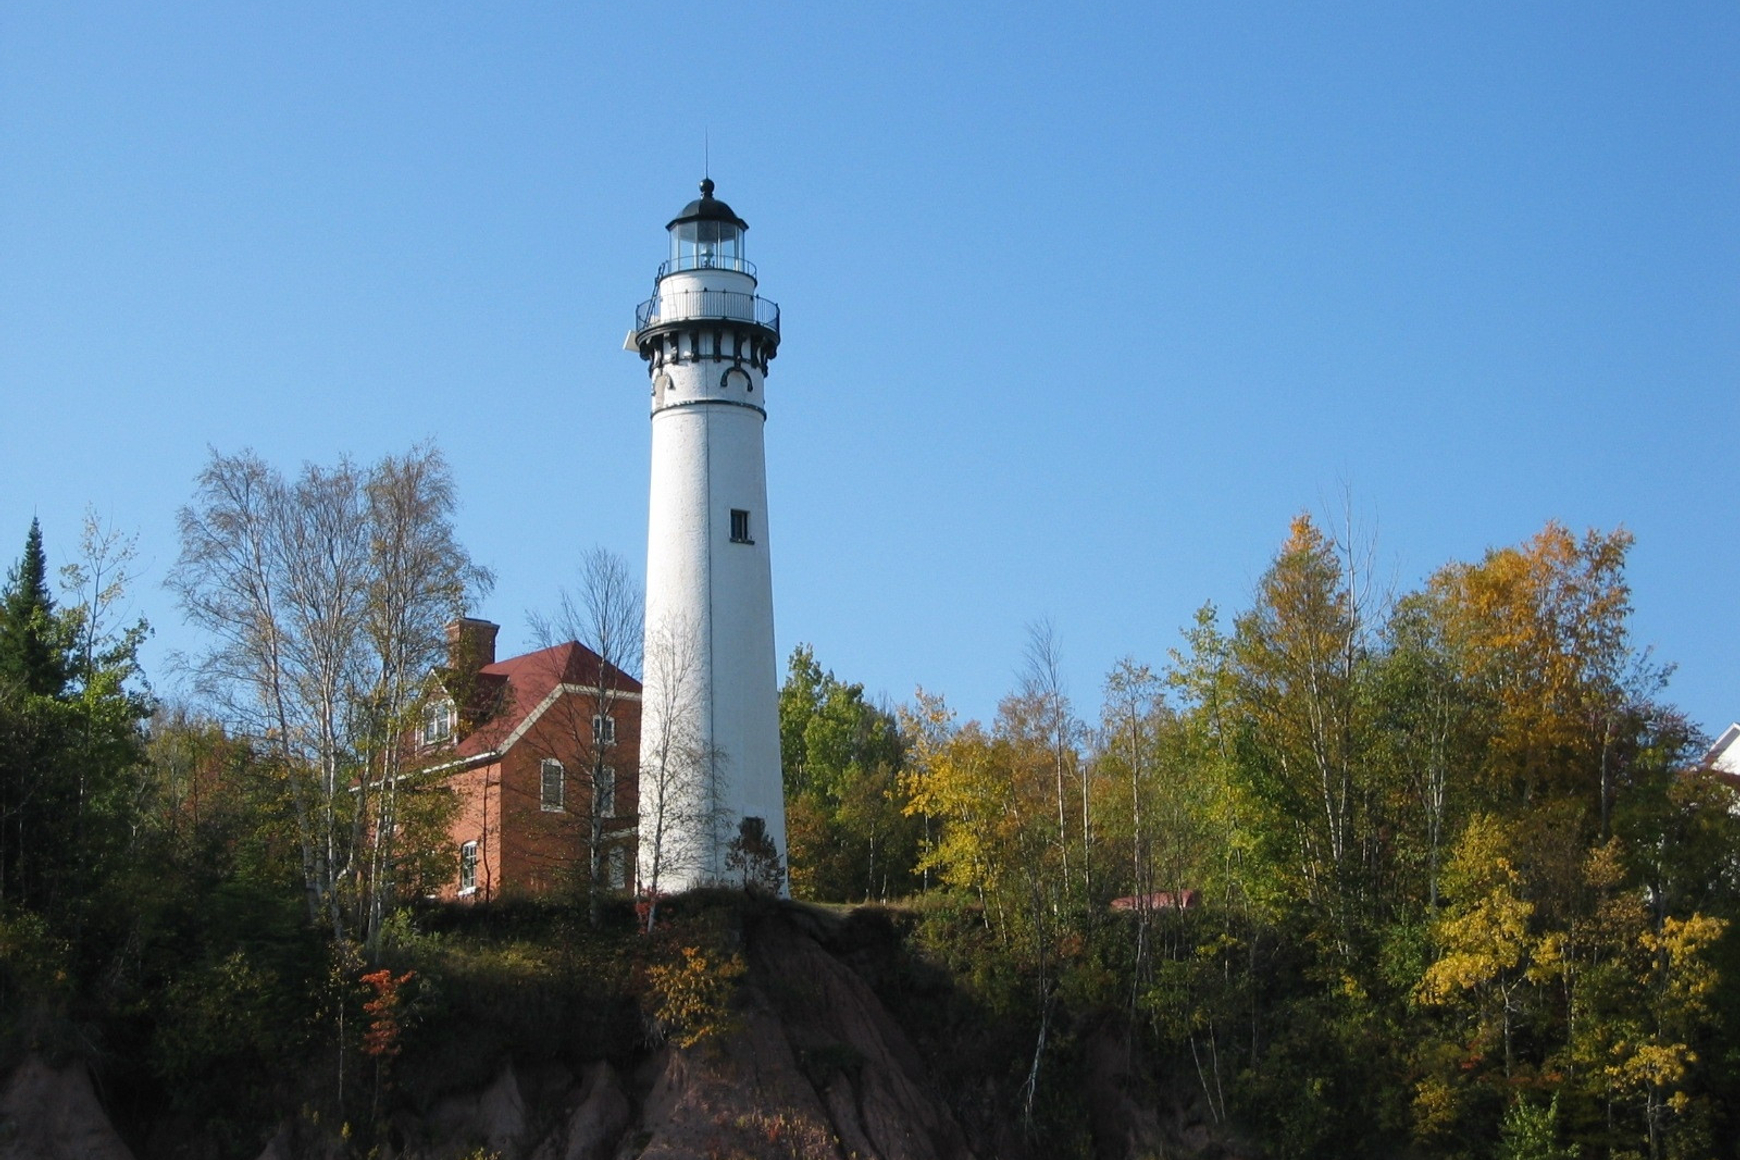 Tall white lighthouse stands next to red brick building in forested landscape against clear blue sky